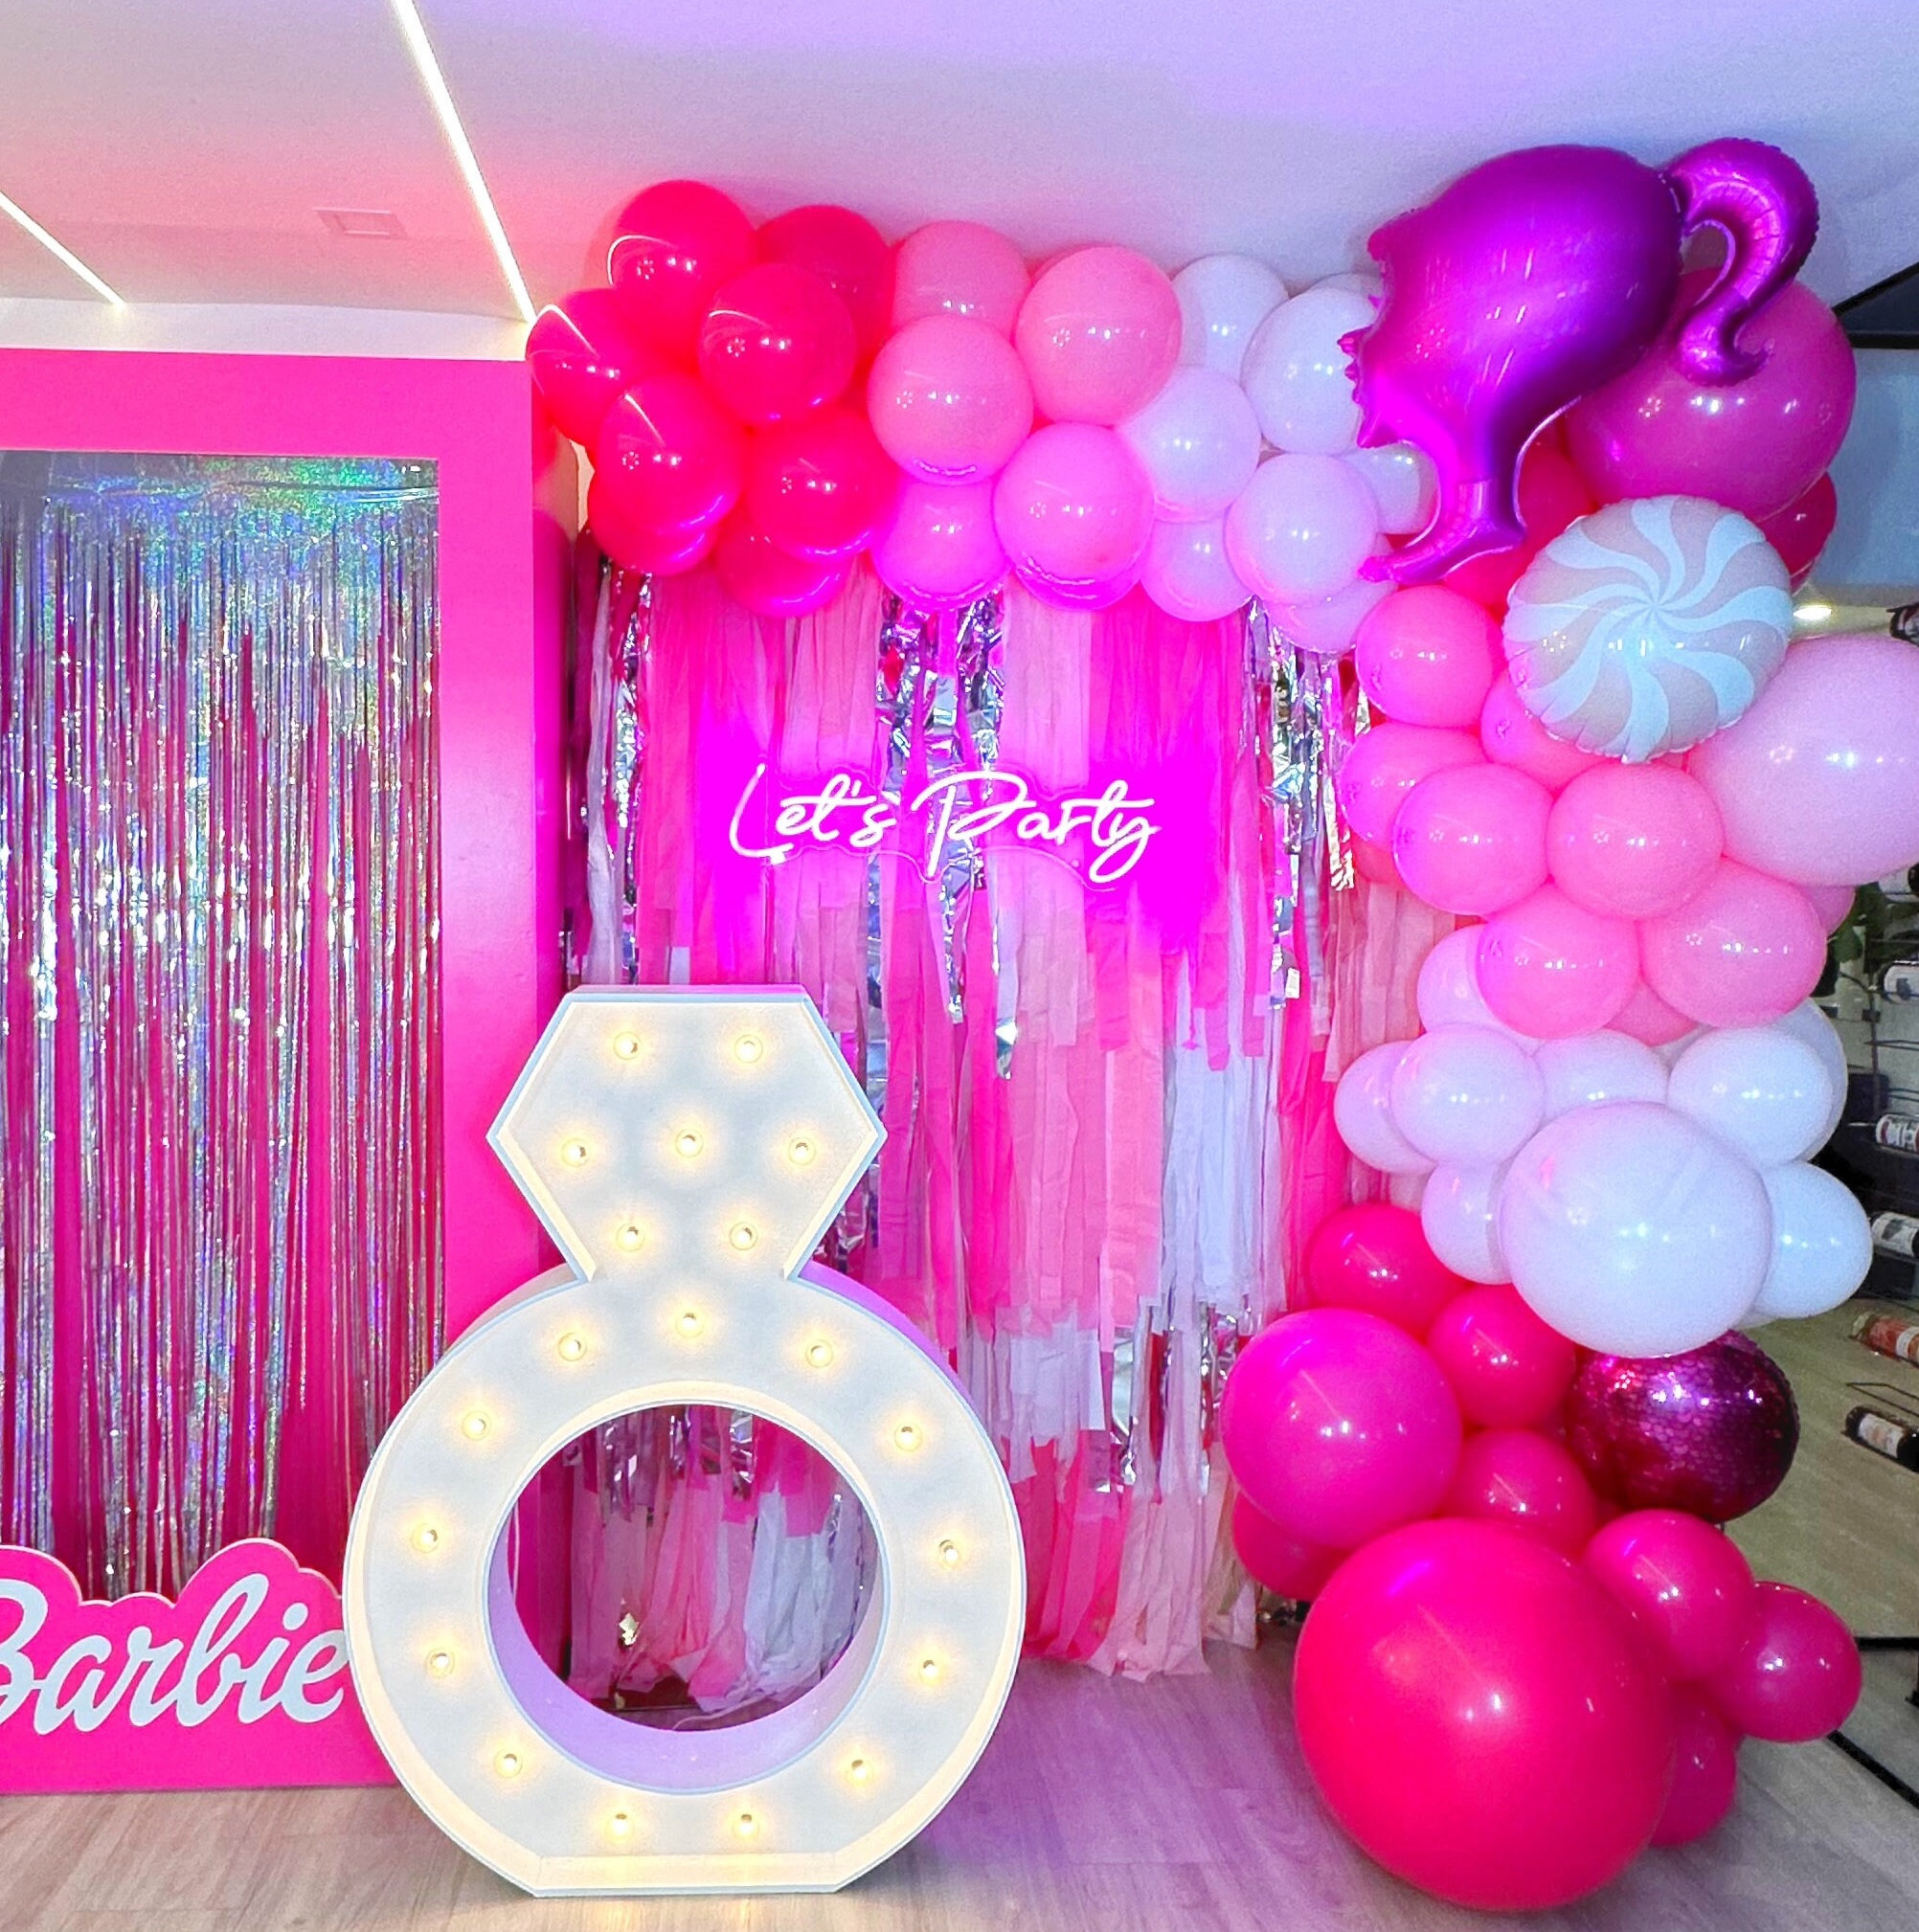 Barbie Bash: Planning the Ultimate Barbie Party插图3